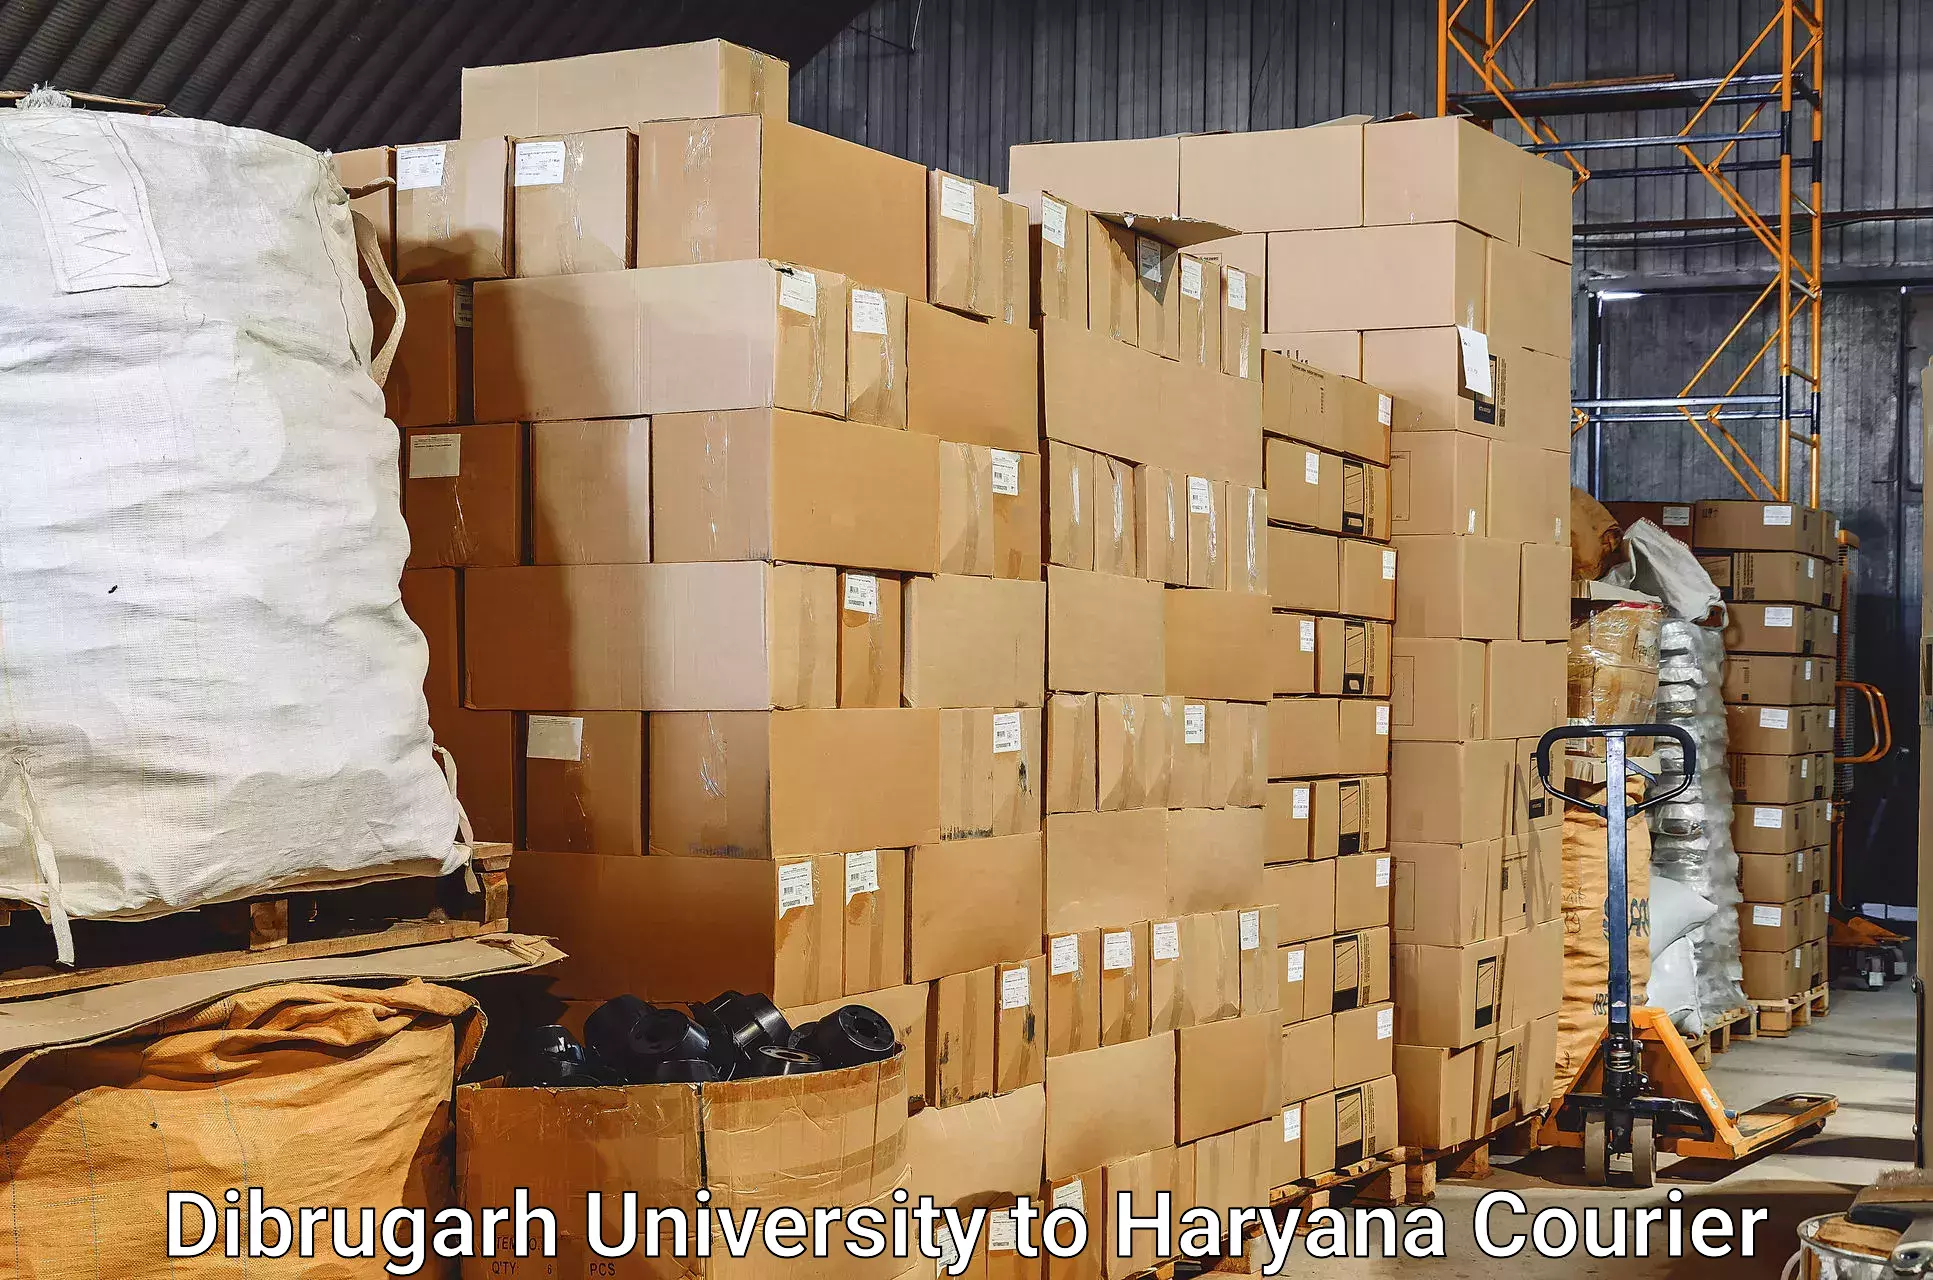 Excess baggage transport in Dibrugarh University to Sohna